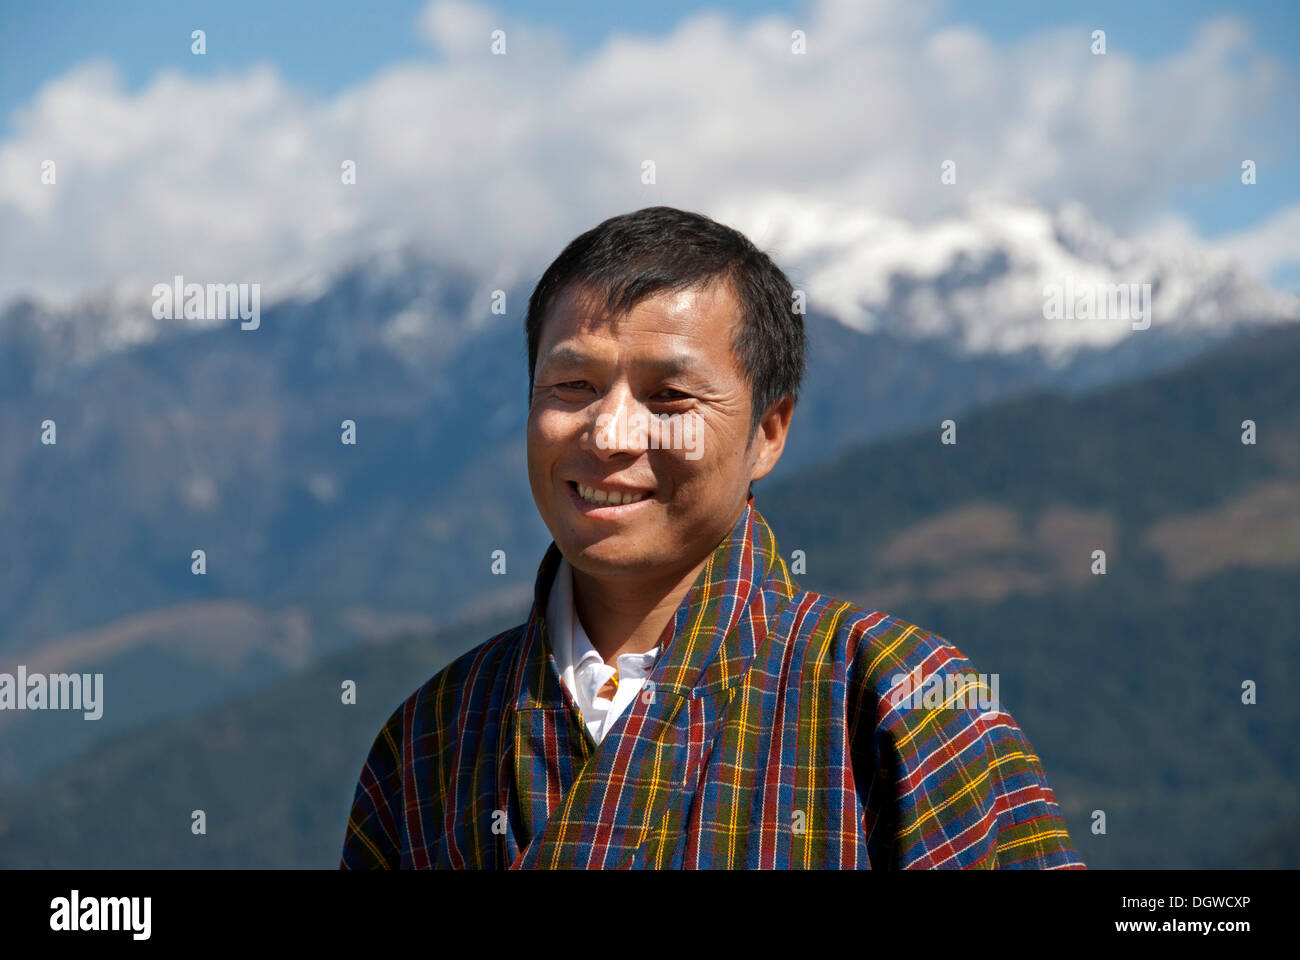 Man smiling, portrait, wearing traditional Gho dress, plaid fabric, the Himalayas, Bhutan, South Asia, Asia Stock Photo